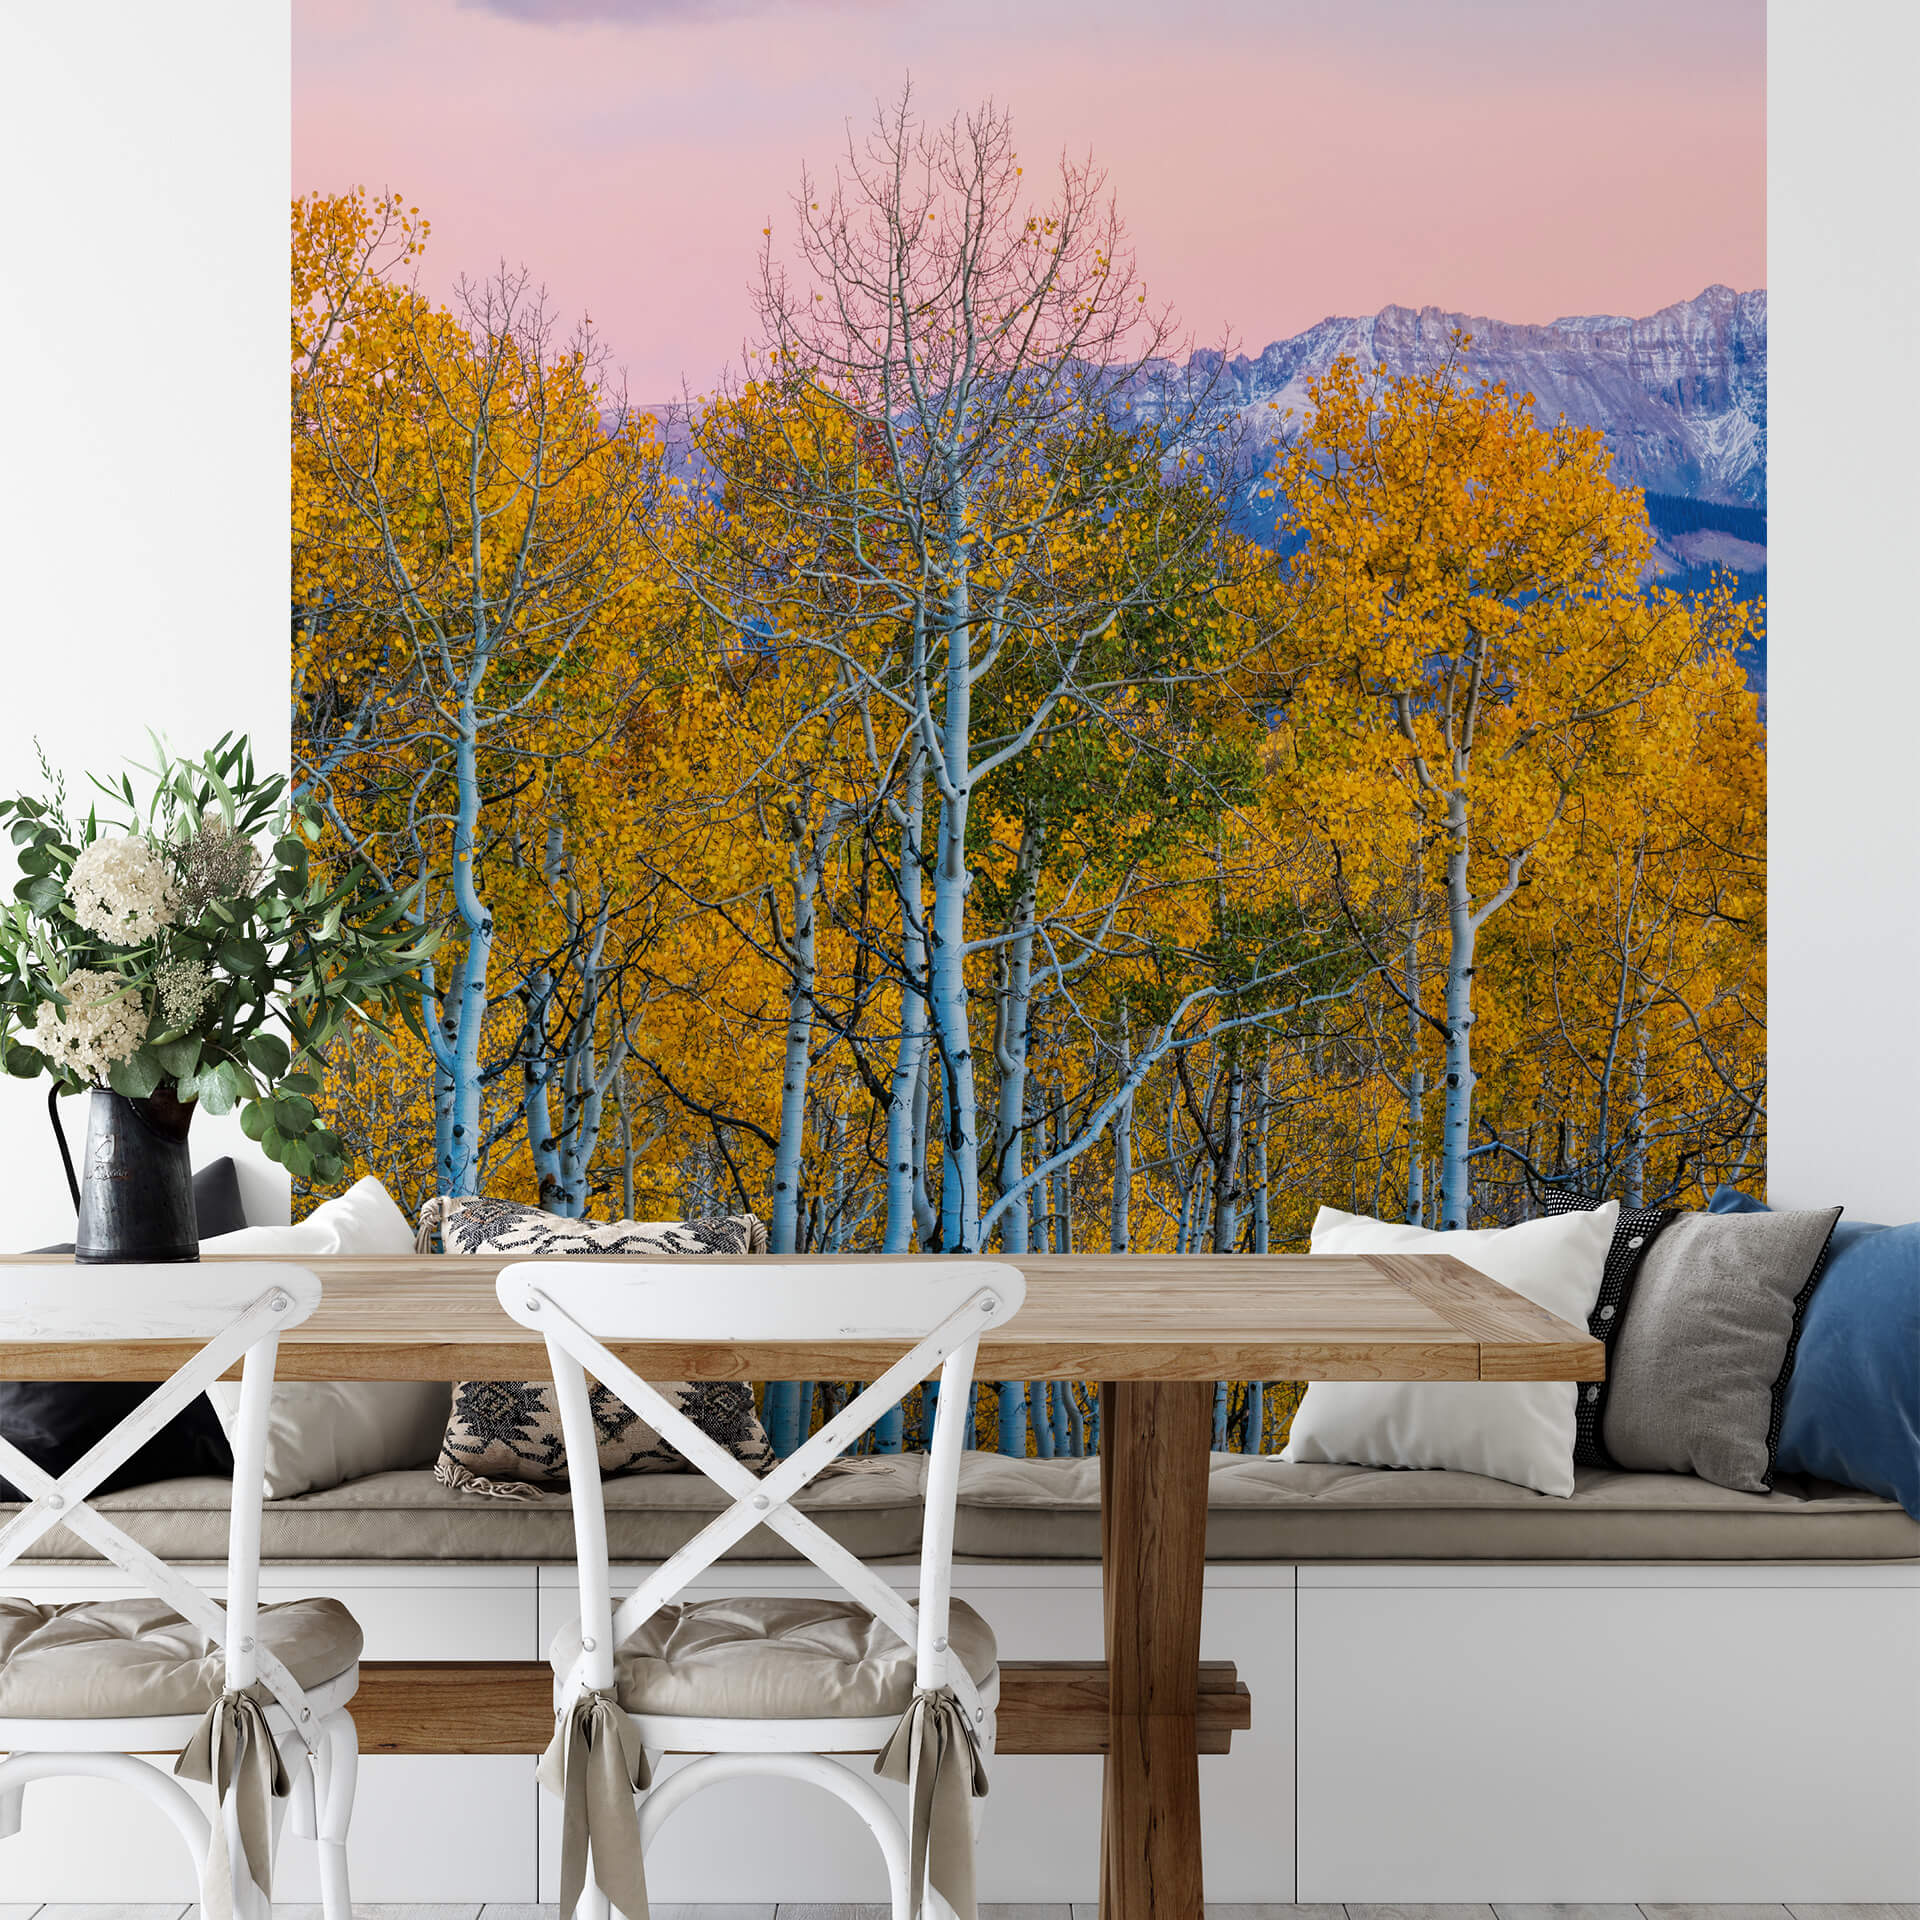 Fototapete Birches And Mountains 1,92 x 2,6 m